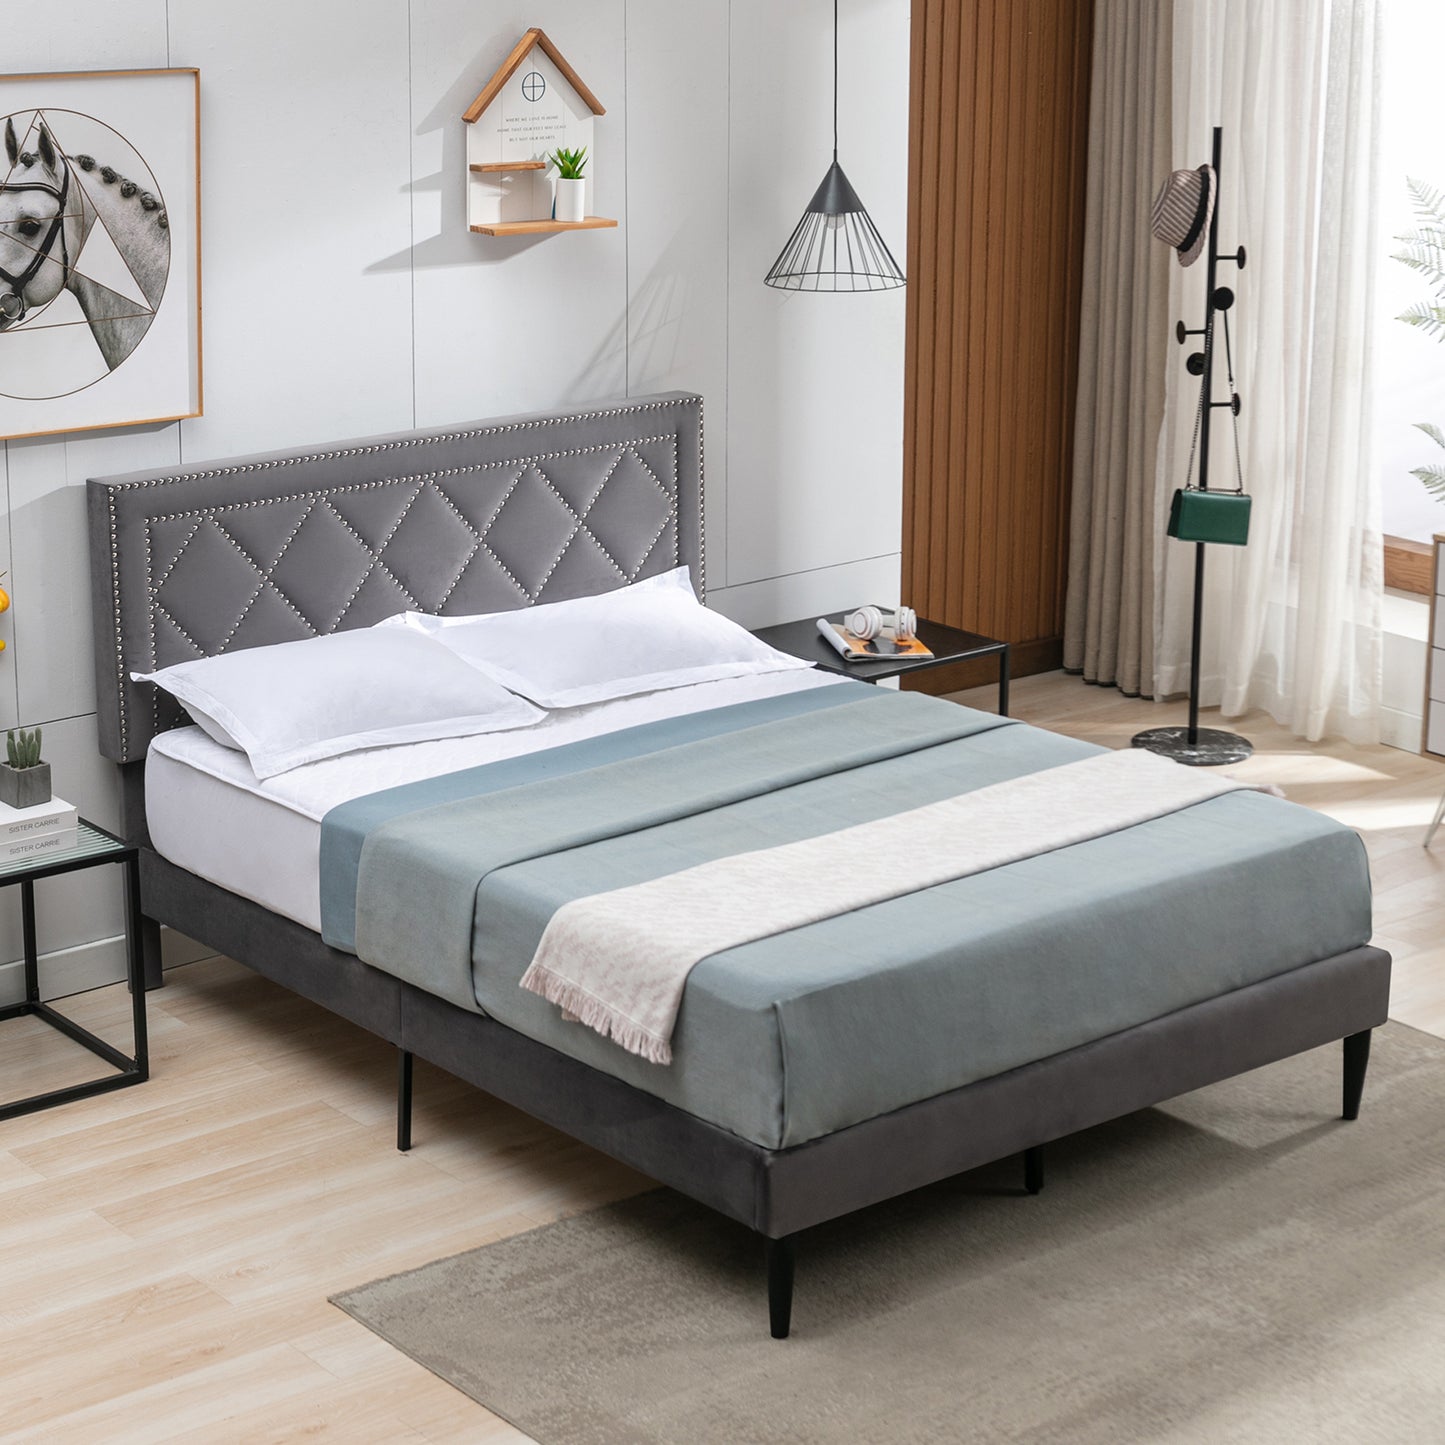 SYNGAR Upholstered Queen Bed Frame with Nailhead Trim Headboard, Fabric Platform Bed Frame Queen Size Bed Frame, Bedroom Furniture for Teens Adults, No Box Spring Needed, Gray